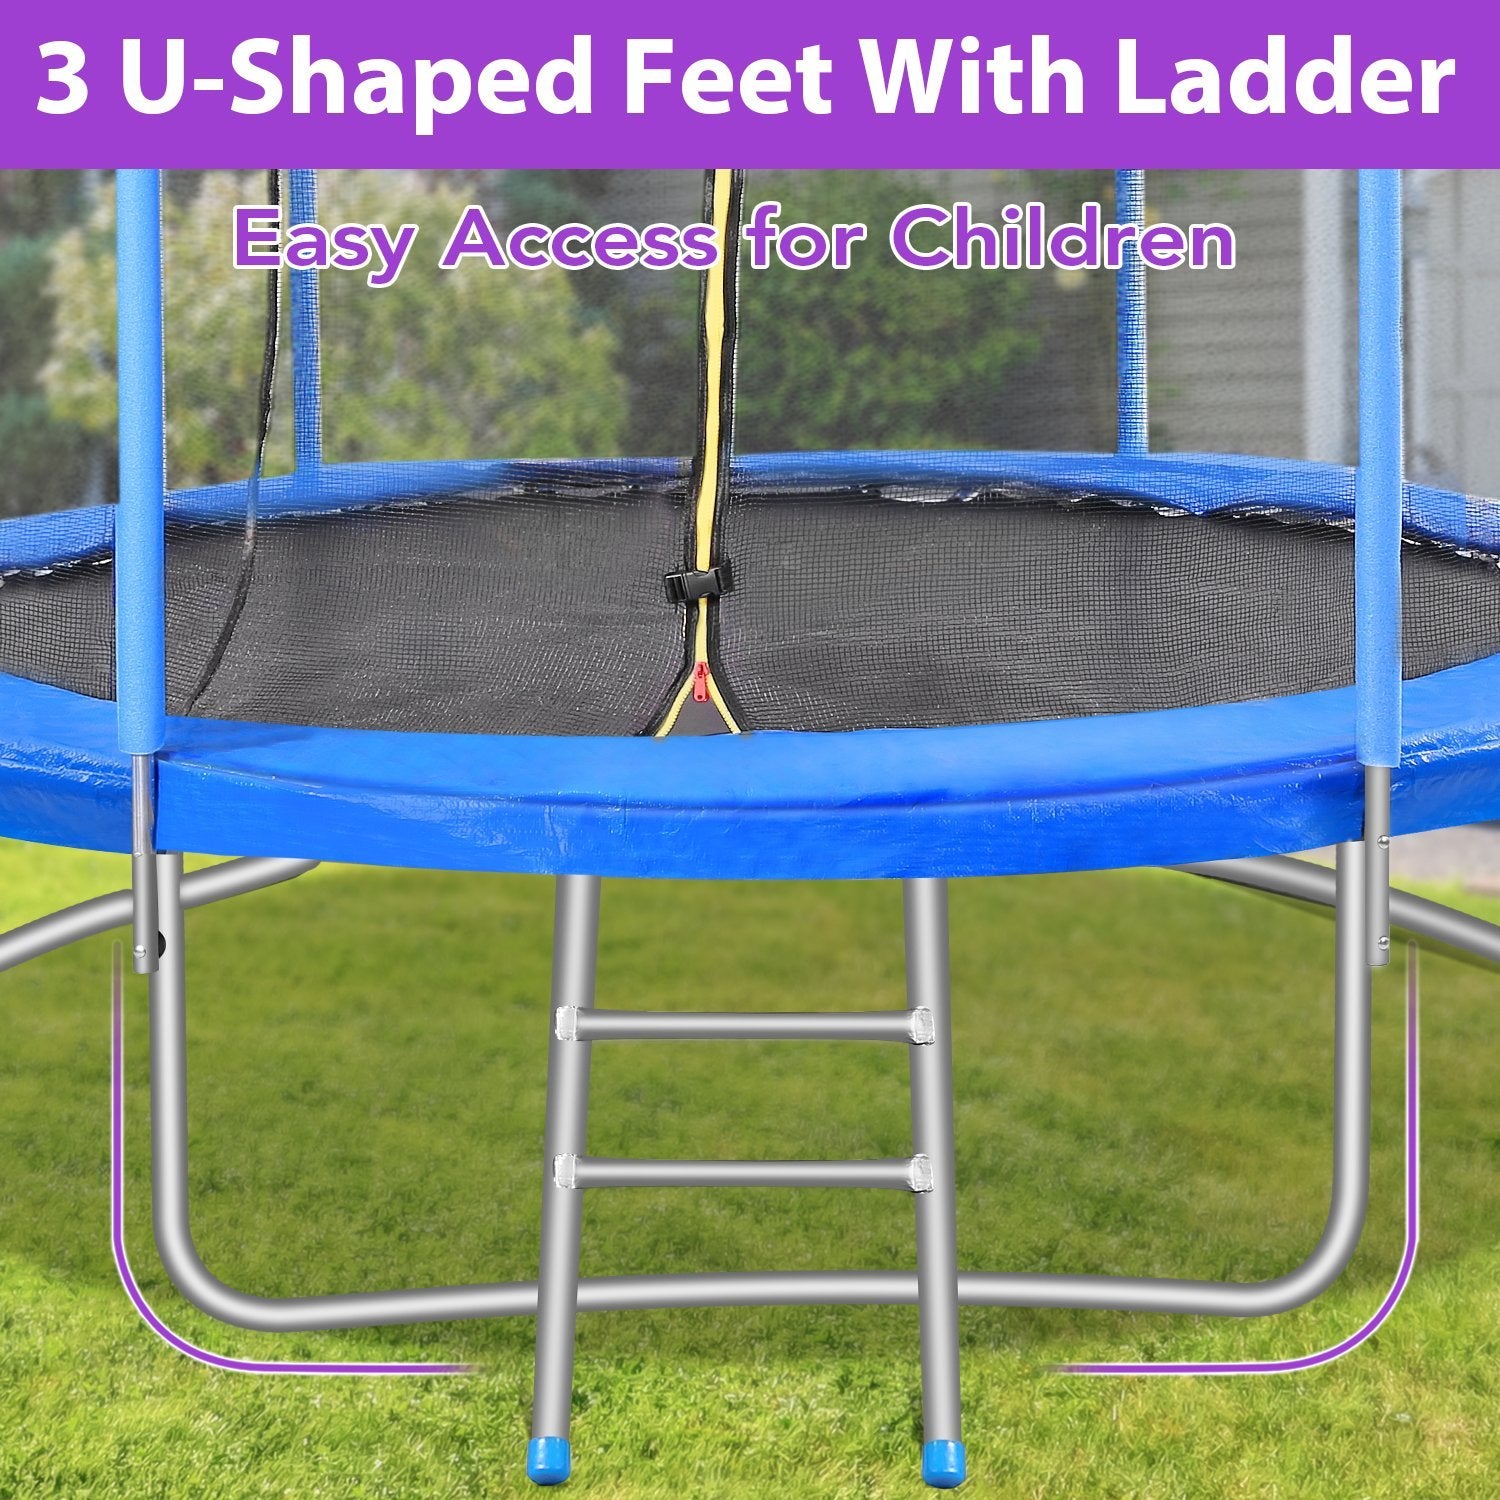 Load image into Gallery viewer, MaxKare 10 FT Trampoline with Safety Enclosure and Ladder - Recreation Trampoline for Kids or Adults Combo Bounce in Outdoor &amp; Backyards. - NAIPO
